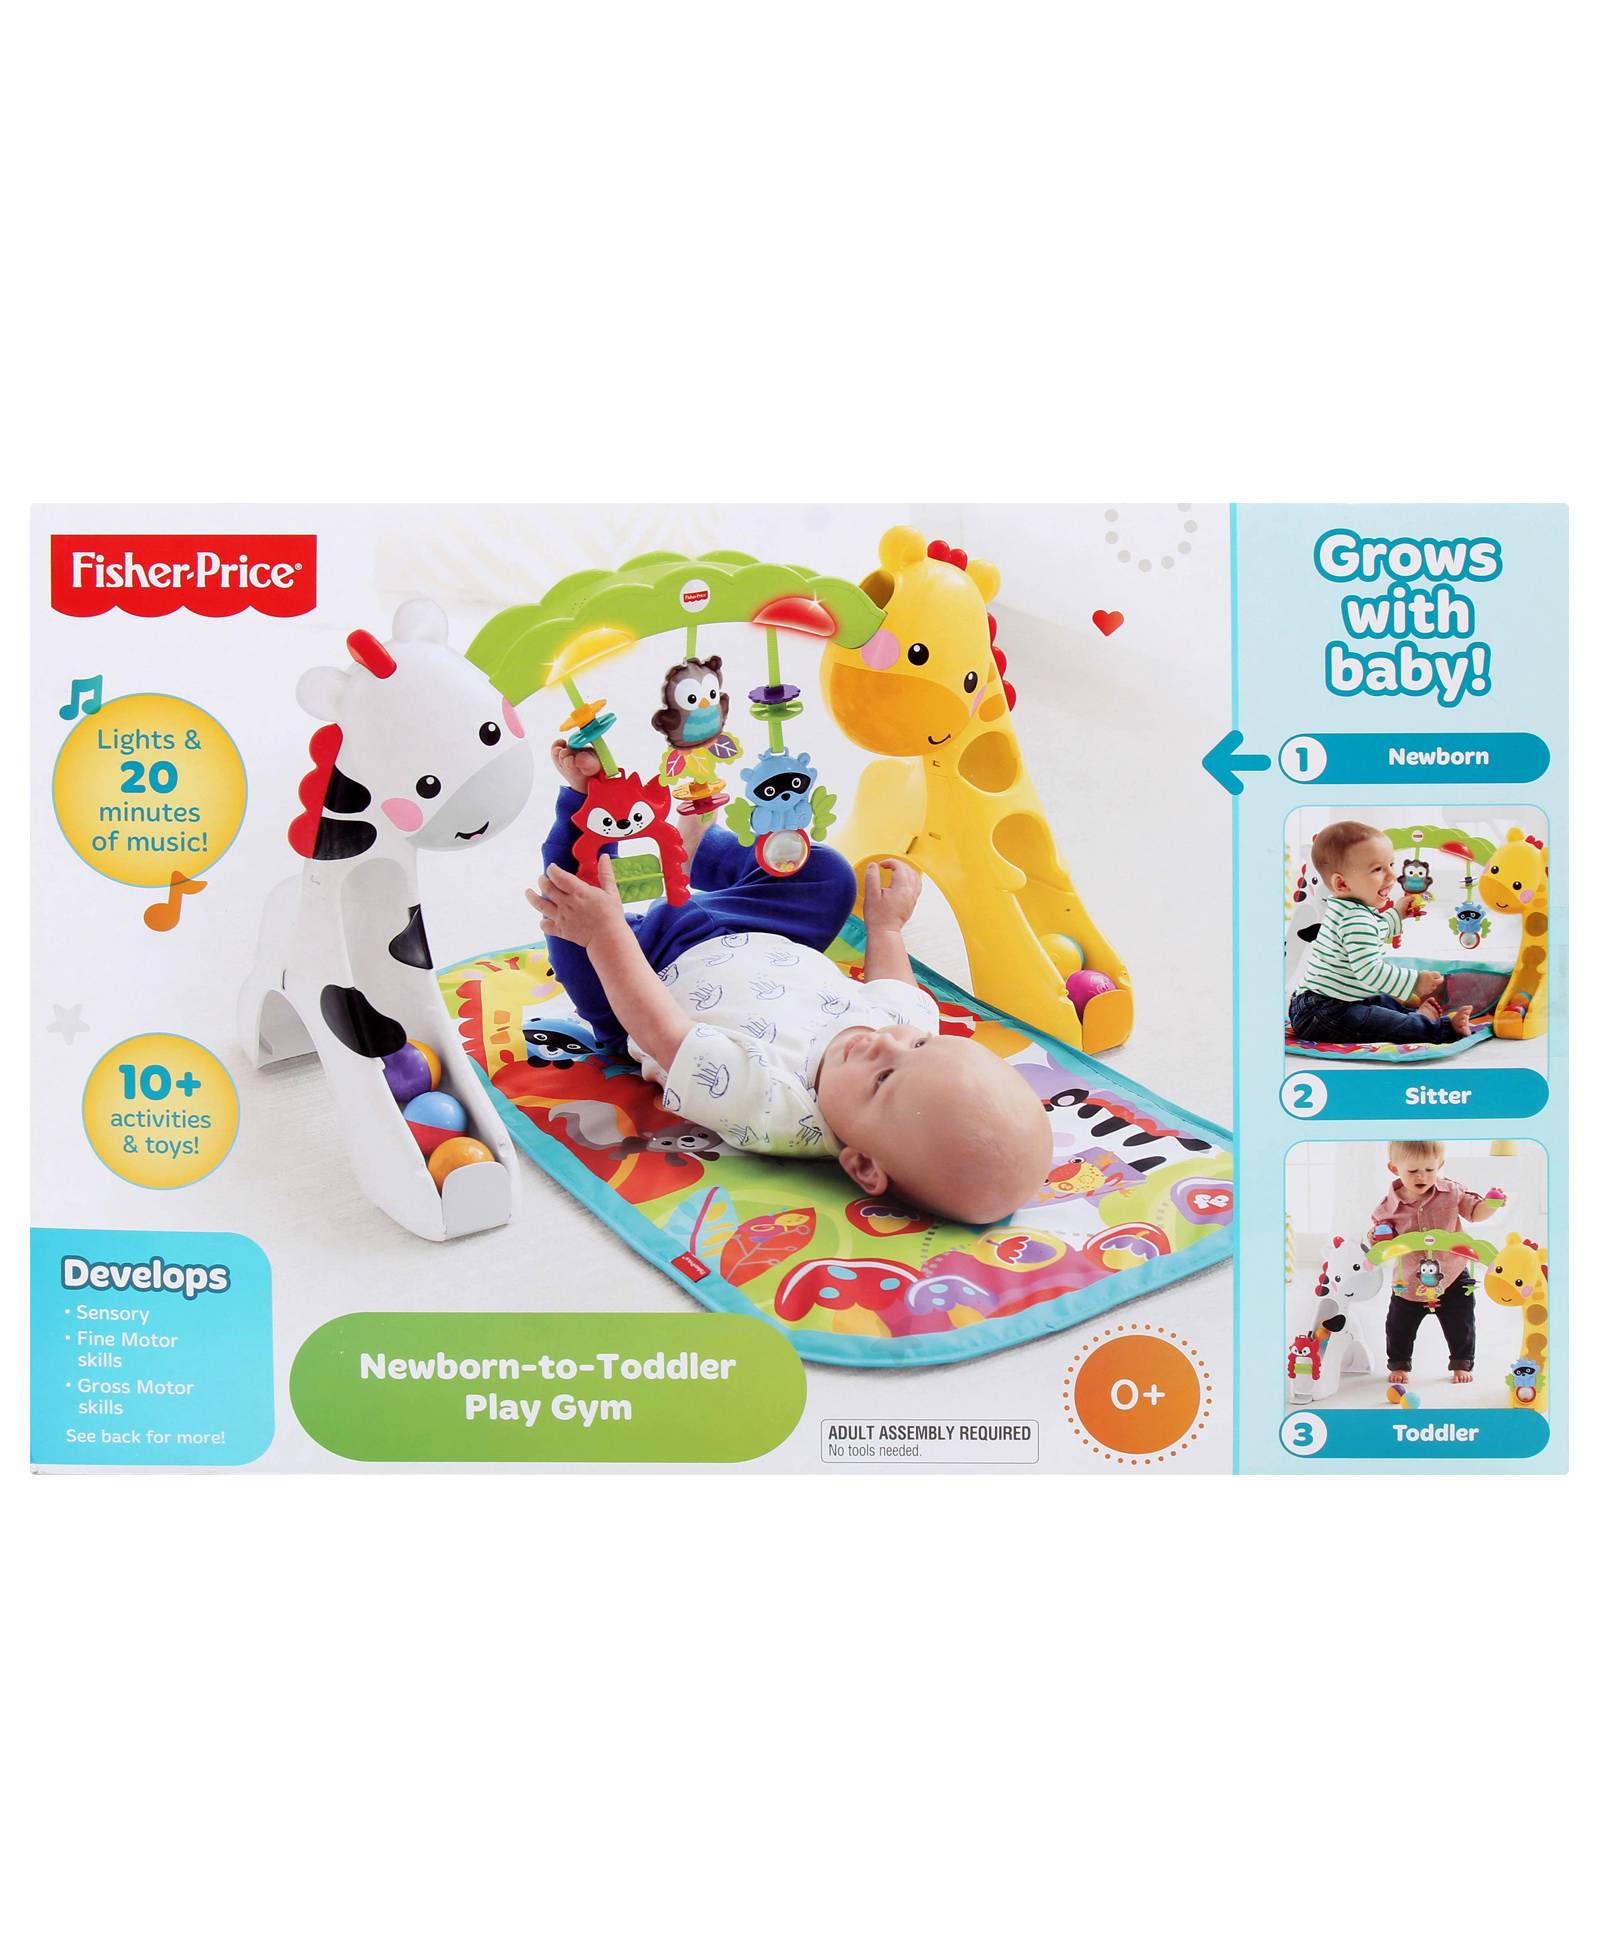 firstcry toys for newborn baby